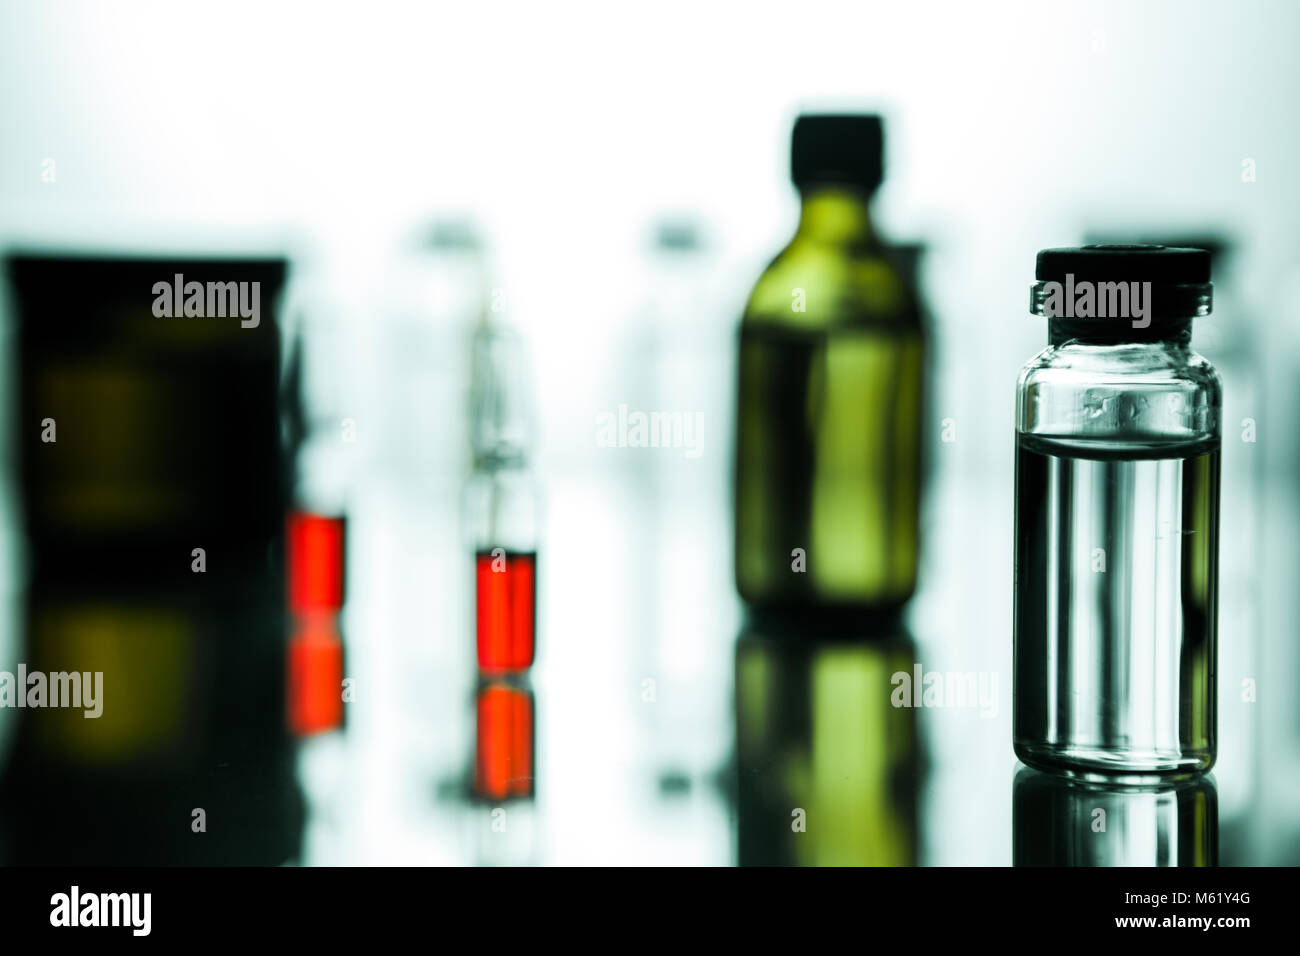 Download Group Of Ampoules With A Transparent Medicine In Medical Laboratory Stock Photo Alamy Yellowimages Mockups